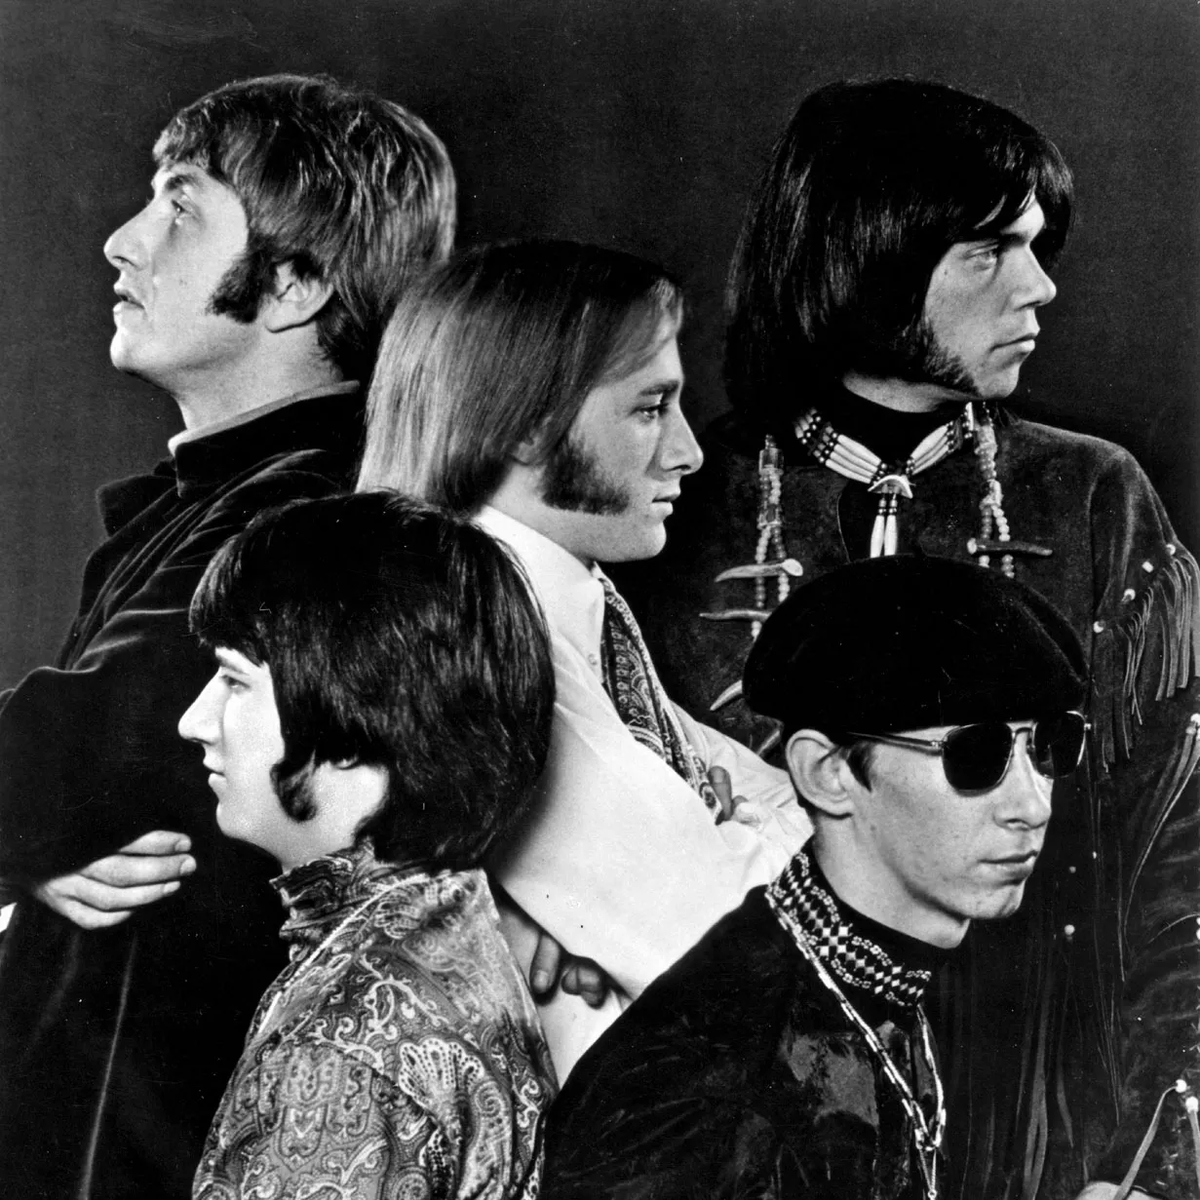 #OnThisDay in 1966, #BuffaloSpringfield debuted at the #Troubadour. The band was among the first wave of North American bands to become popular in the wake of the British invasion. #sunsetstrip #losangeles #rockangeles #rocknroll #MusicHistory #ClassicRock #LegendaryBands